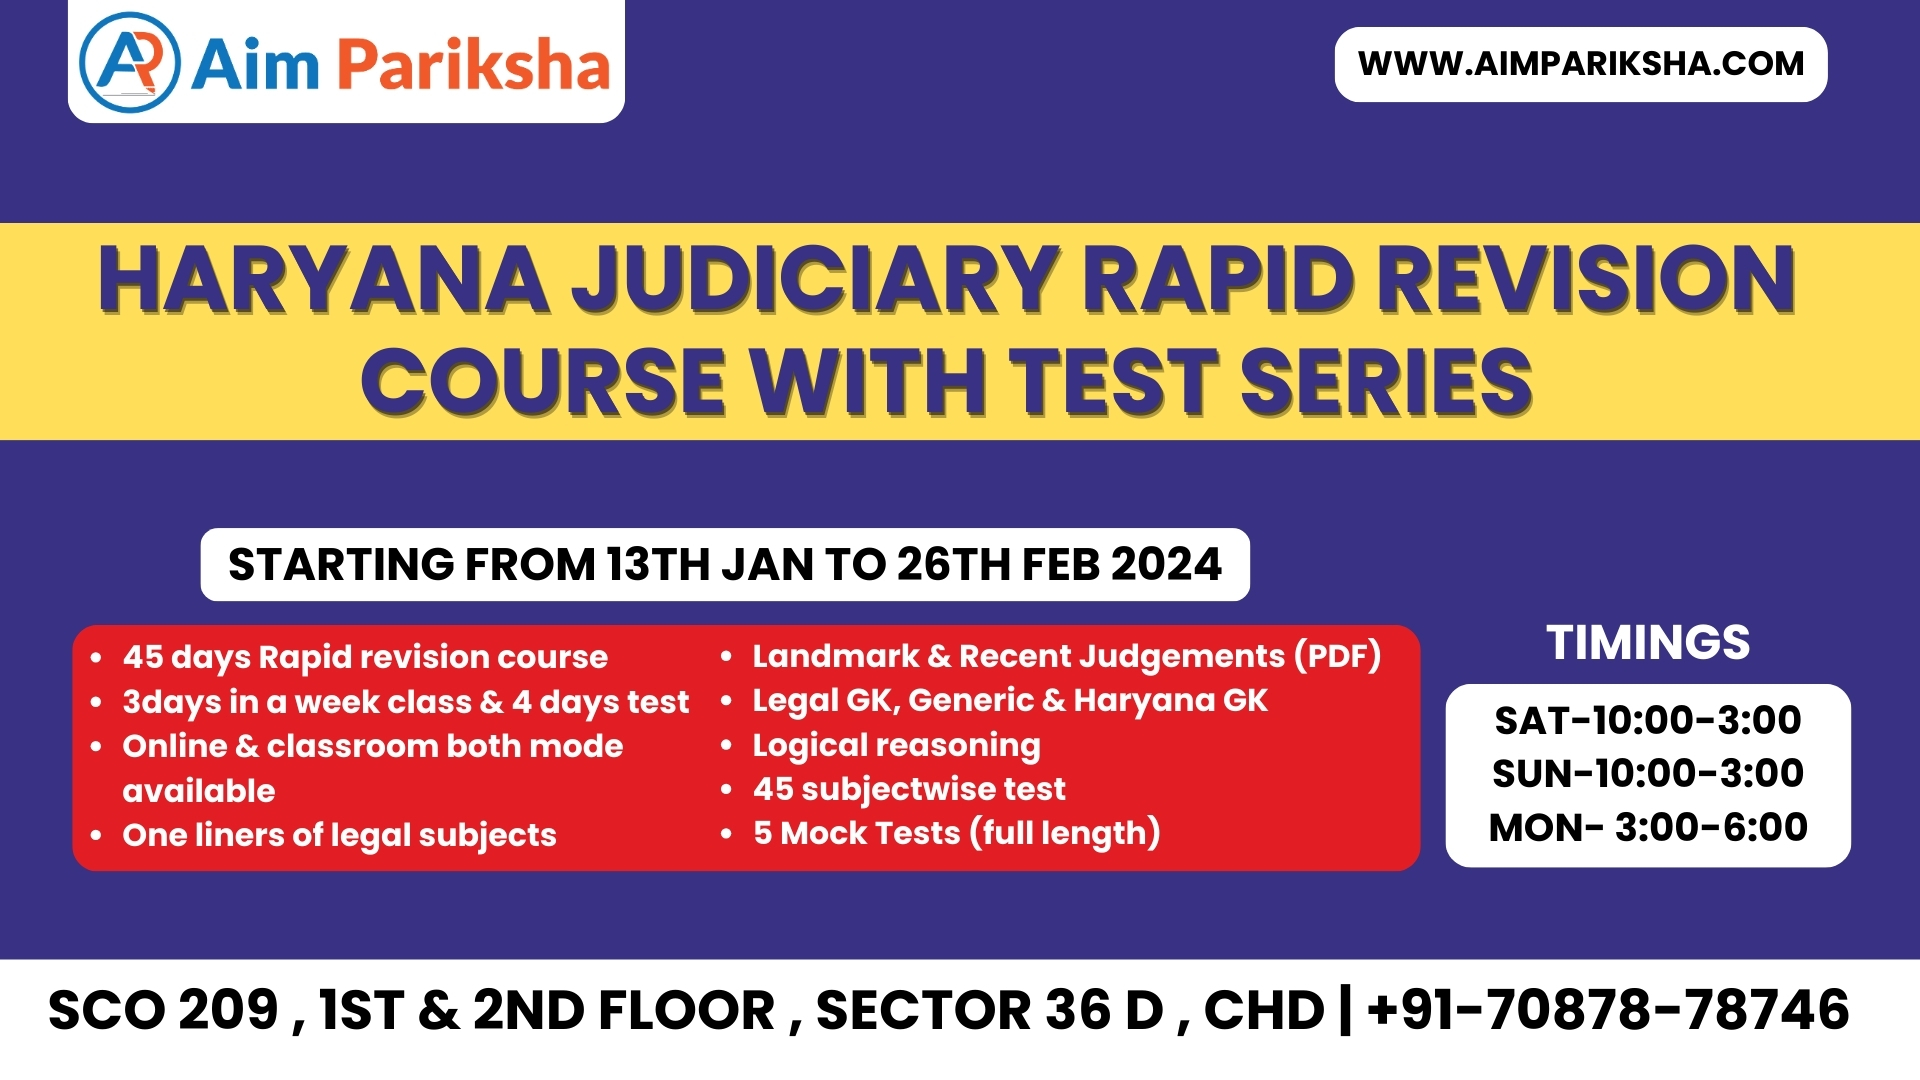 Haryana Judiciary Rapid Revision with test series